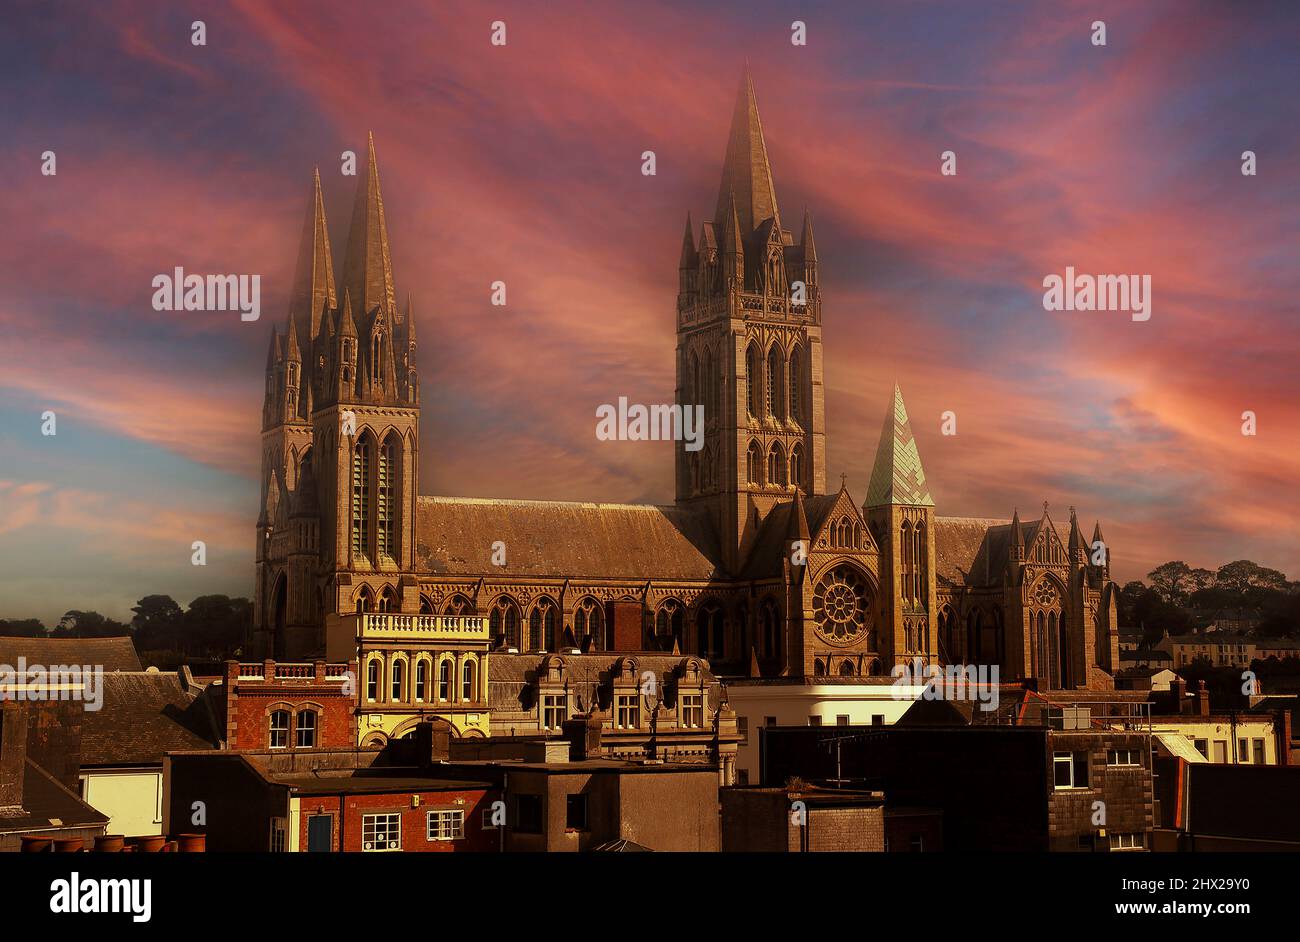 Sunset over Truro cathedral in Cornwall, England Stock Photo